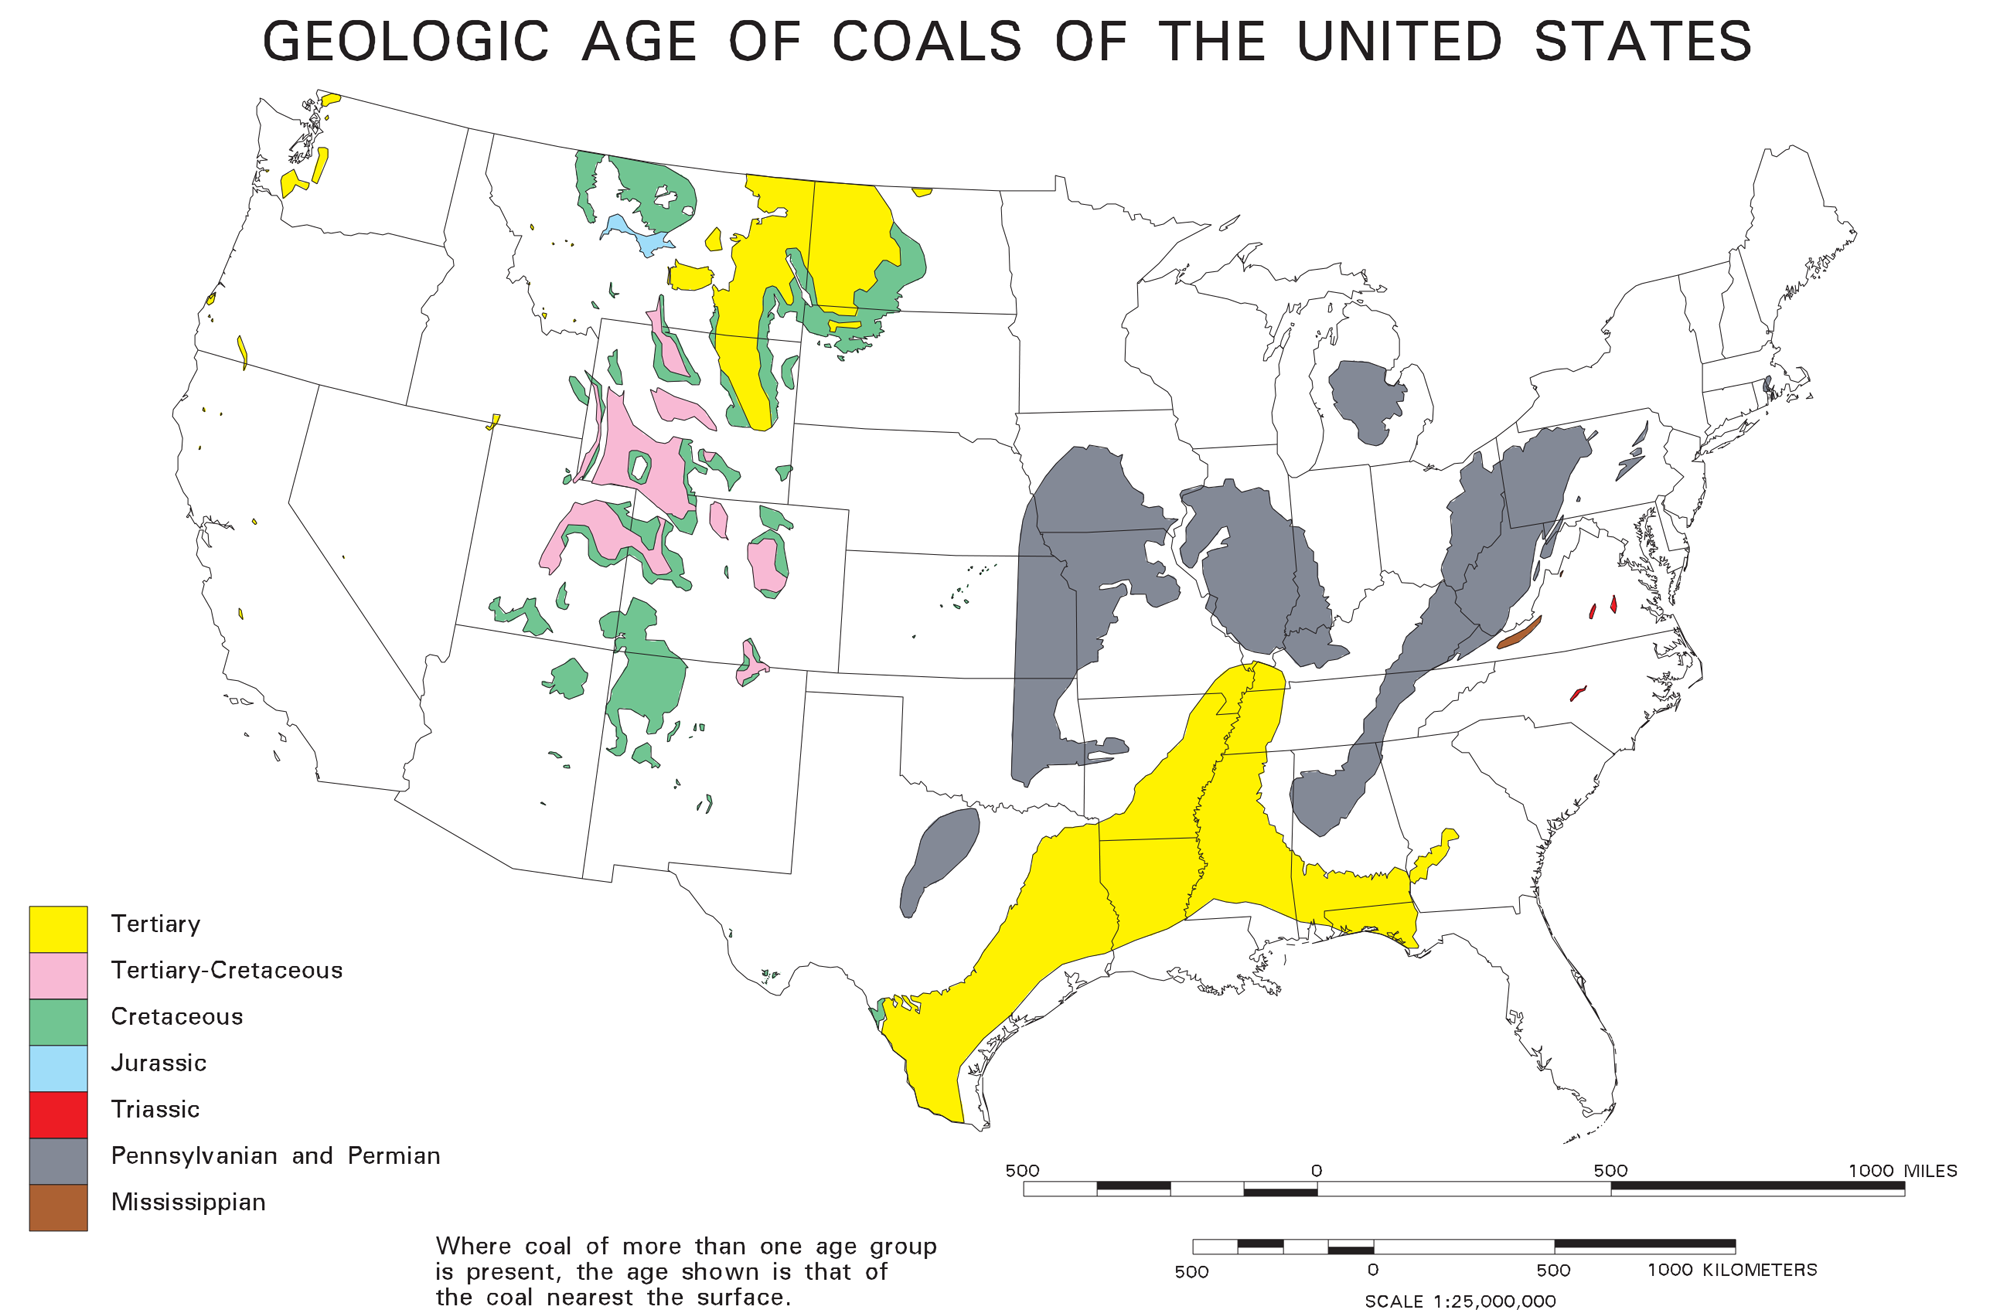 Map of the 48 contiguous states of the US showing distributions of coals and their ages. Most coals are Cretaceous, Tertiary, and Pennsylvanian to Permian.